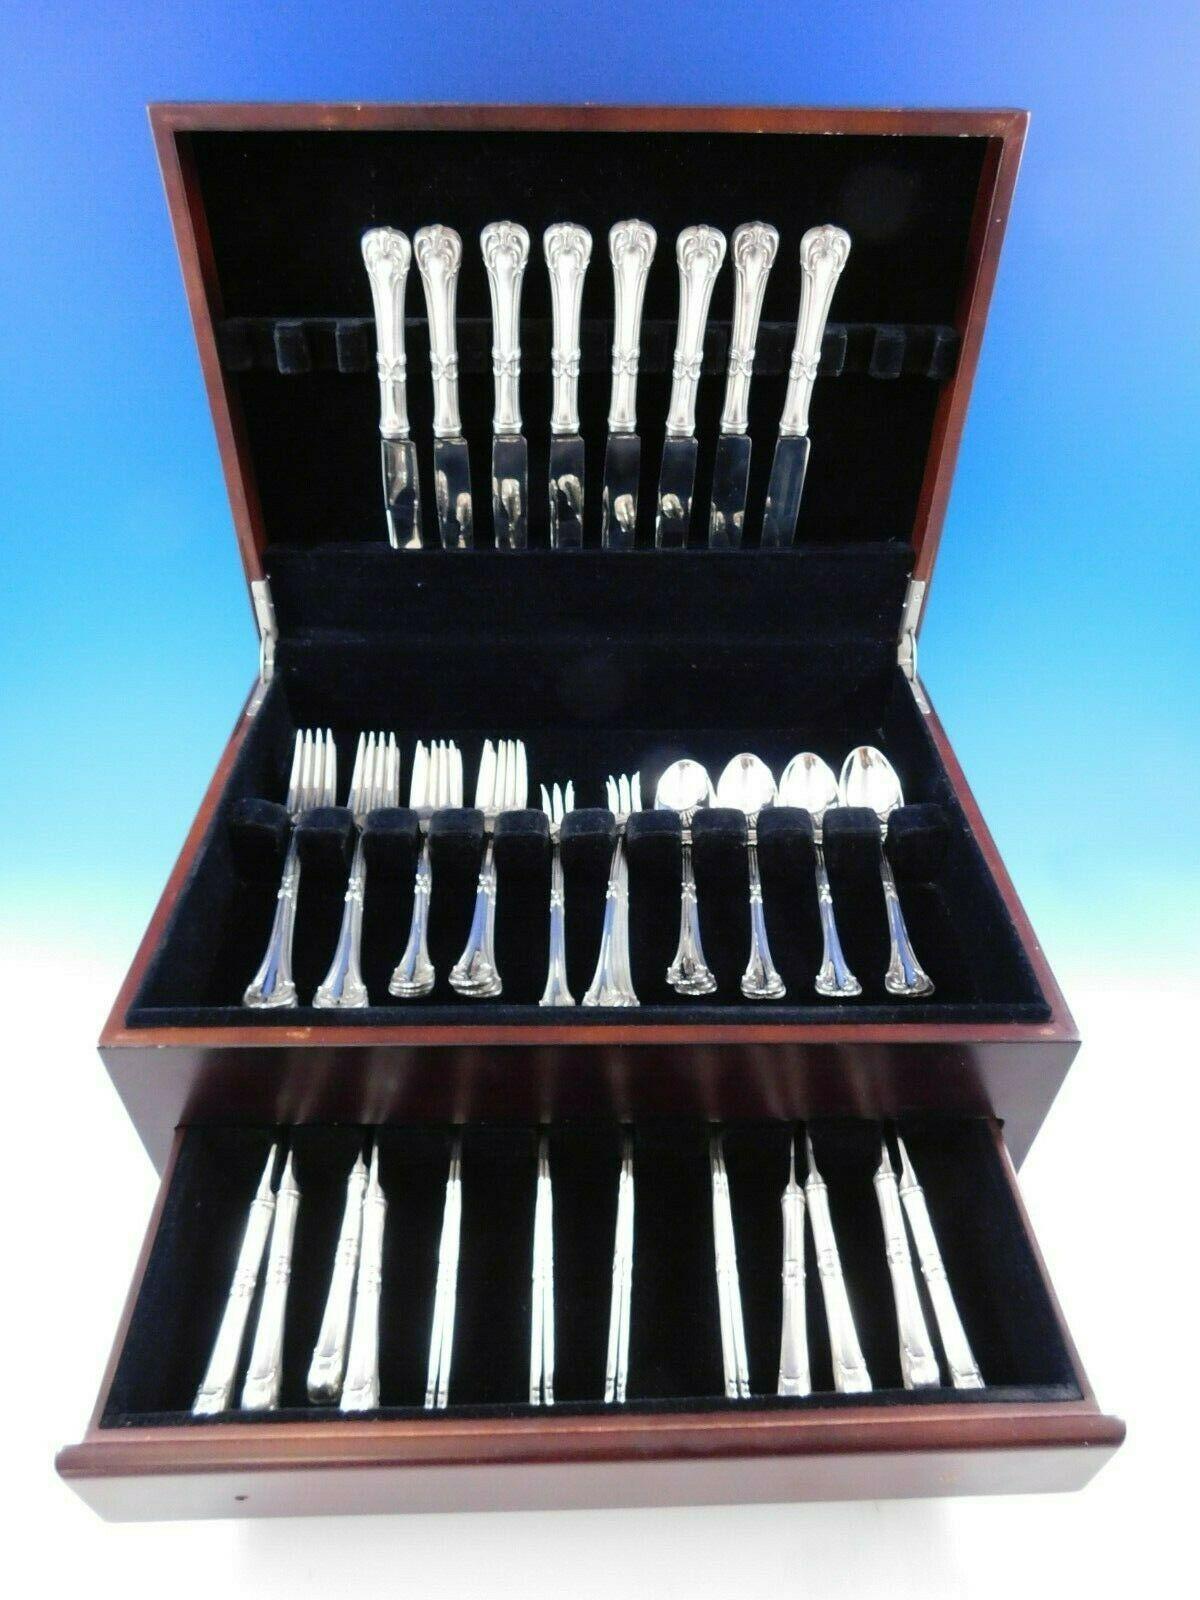 Nupical by Pesa Mexican sterling silver flatware set, 56 pieces. This set includes:

8 knives, 8 3/4